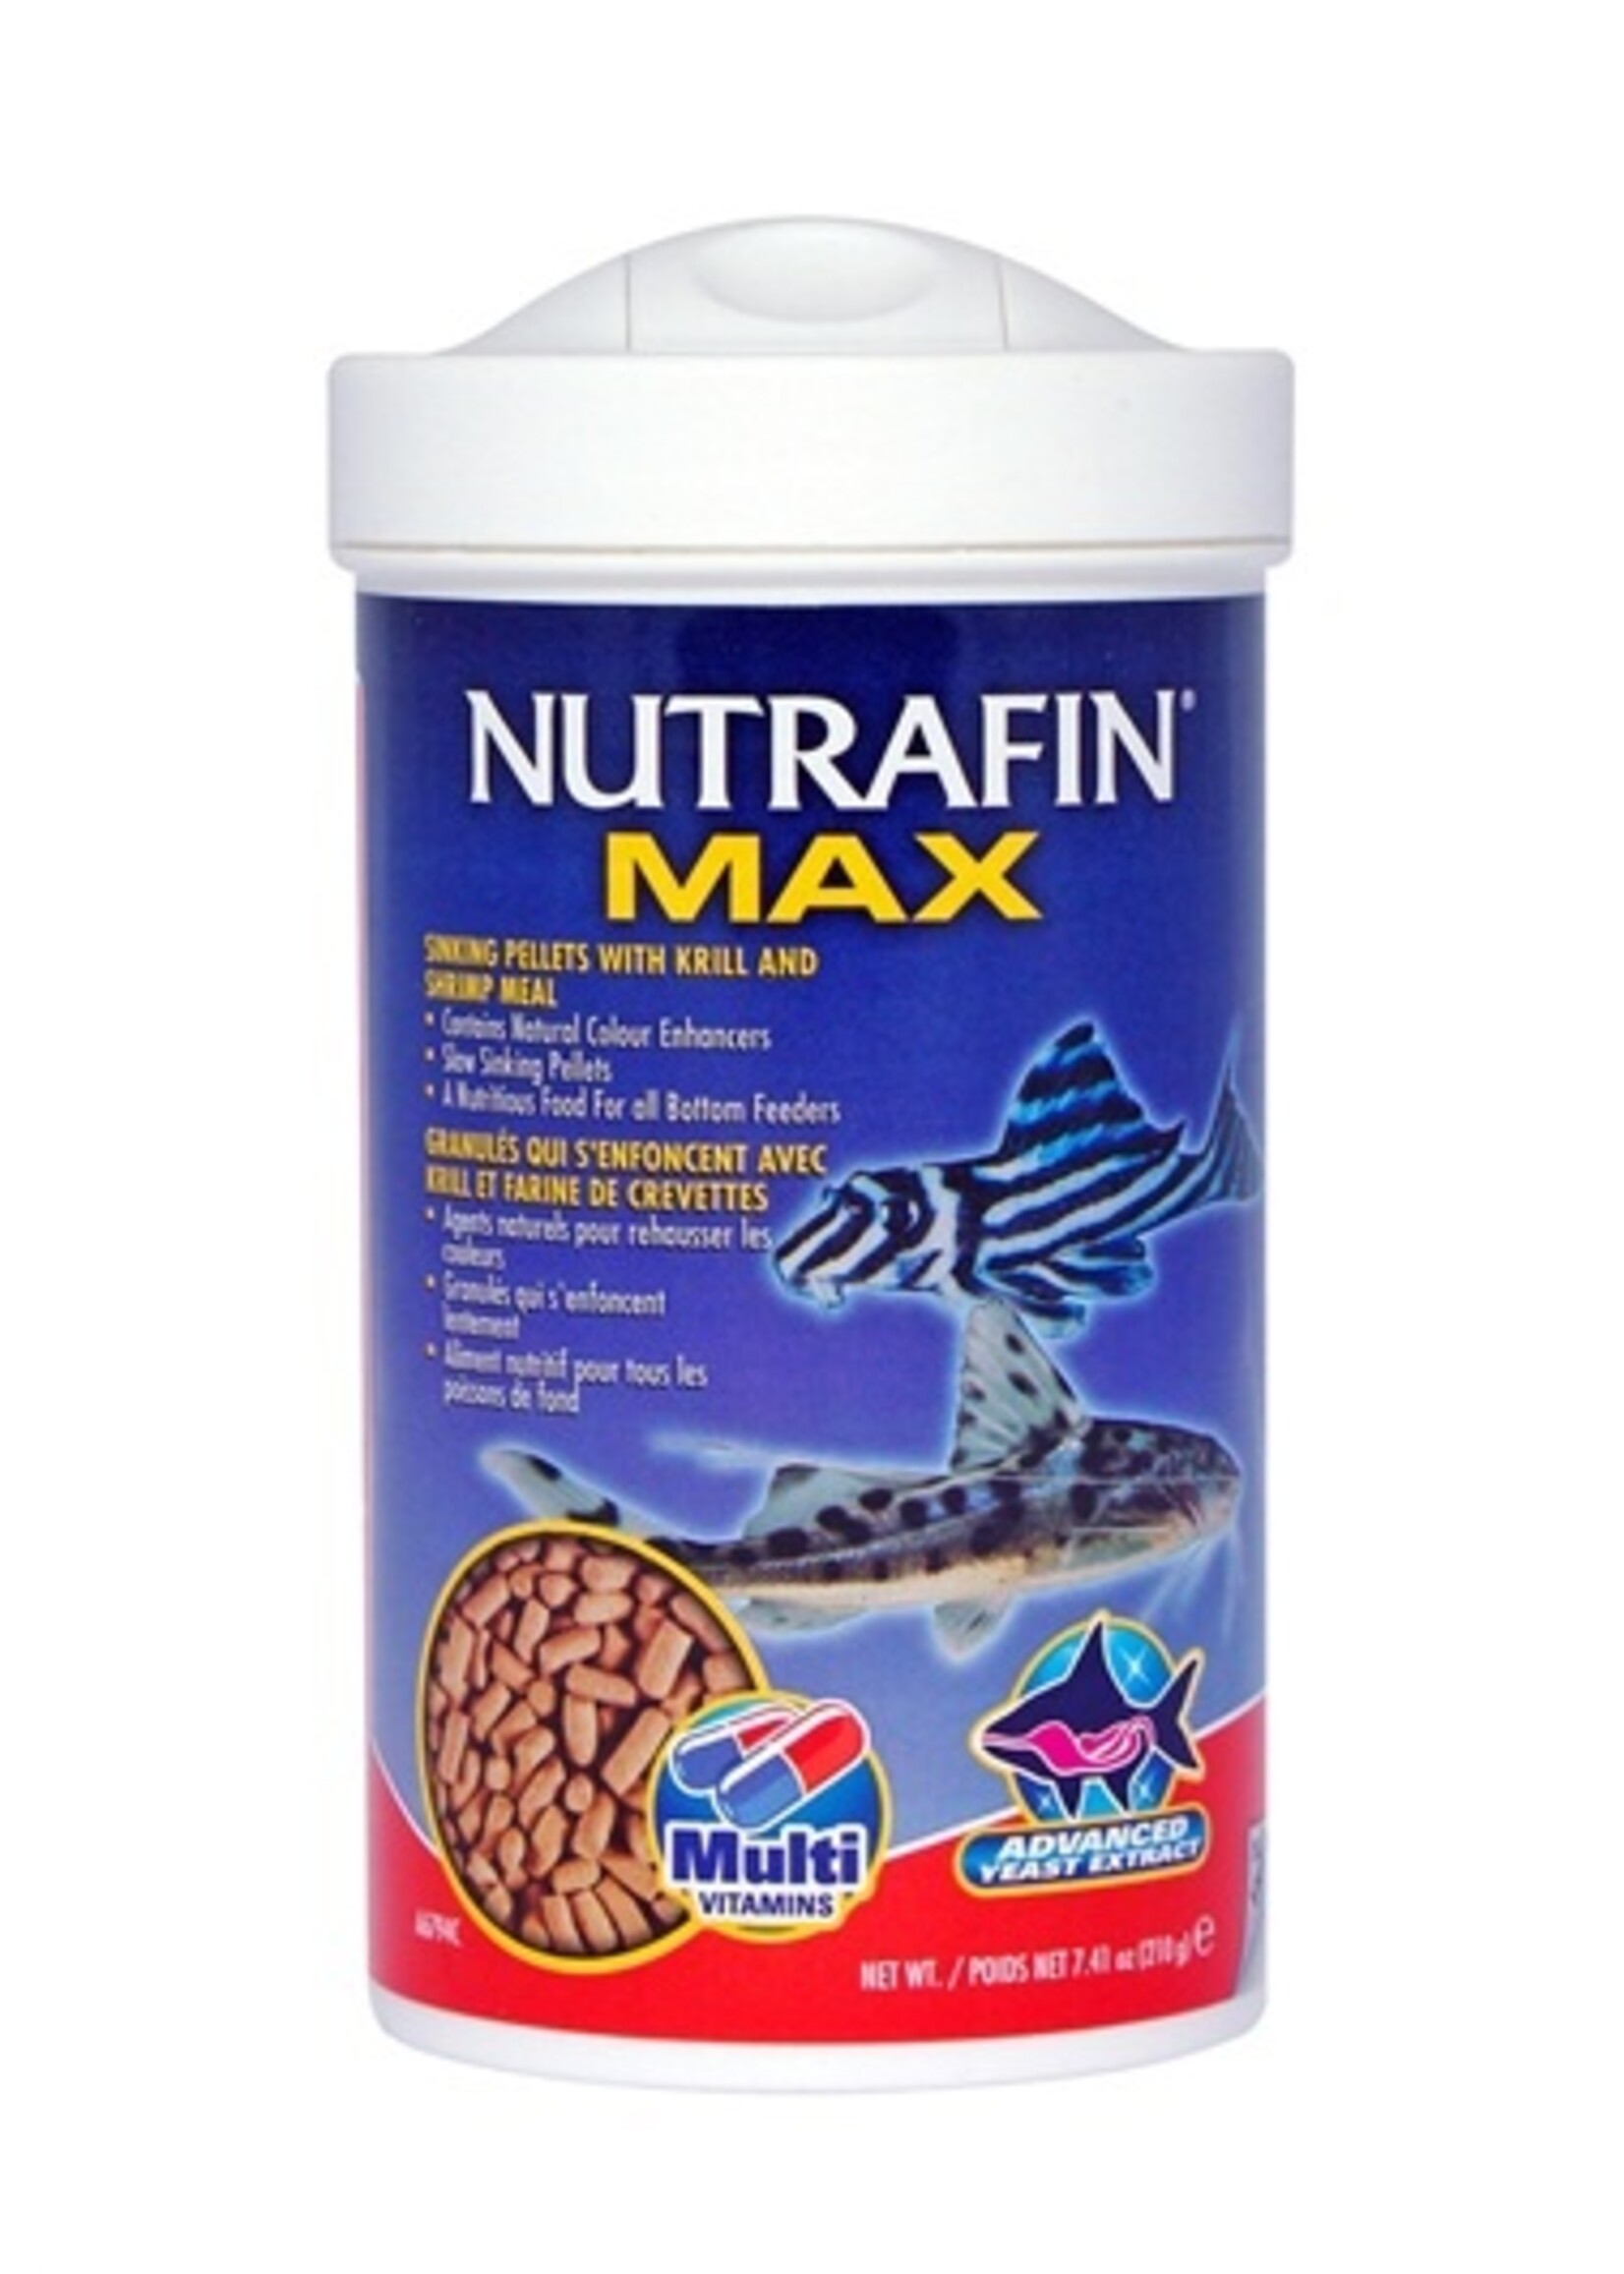 Nutrafin Nutrafin Max Sinking Pellets w/ Krill and Shrimp Meal